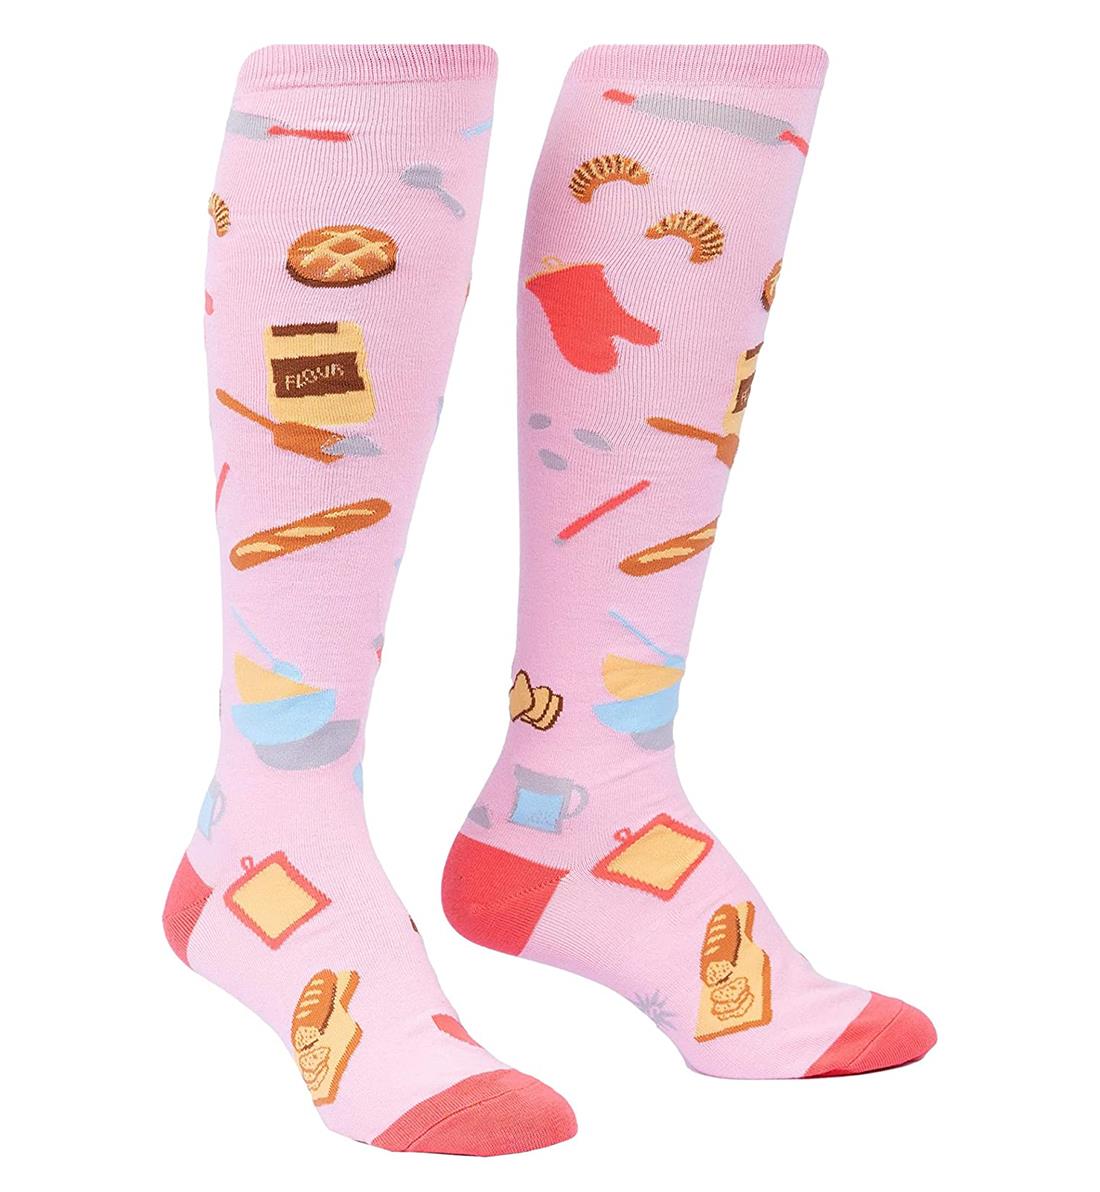 SOCK it to me Unisex Knee High Socks (F0592),Bake at 350 - Bake at 350,One Size